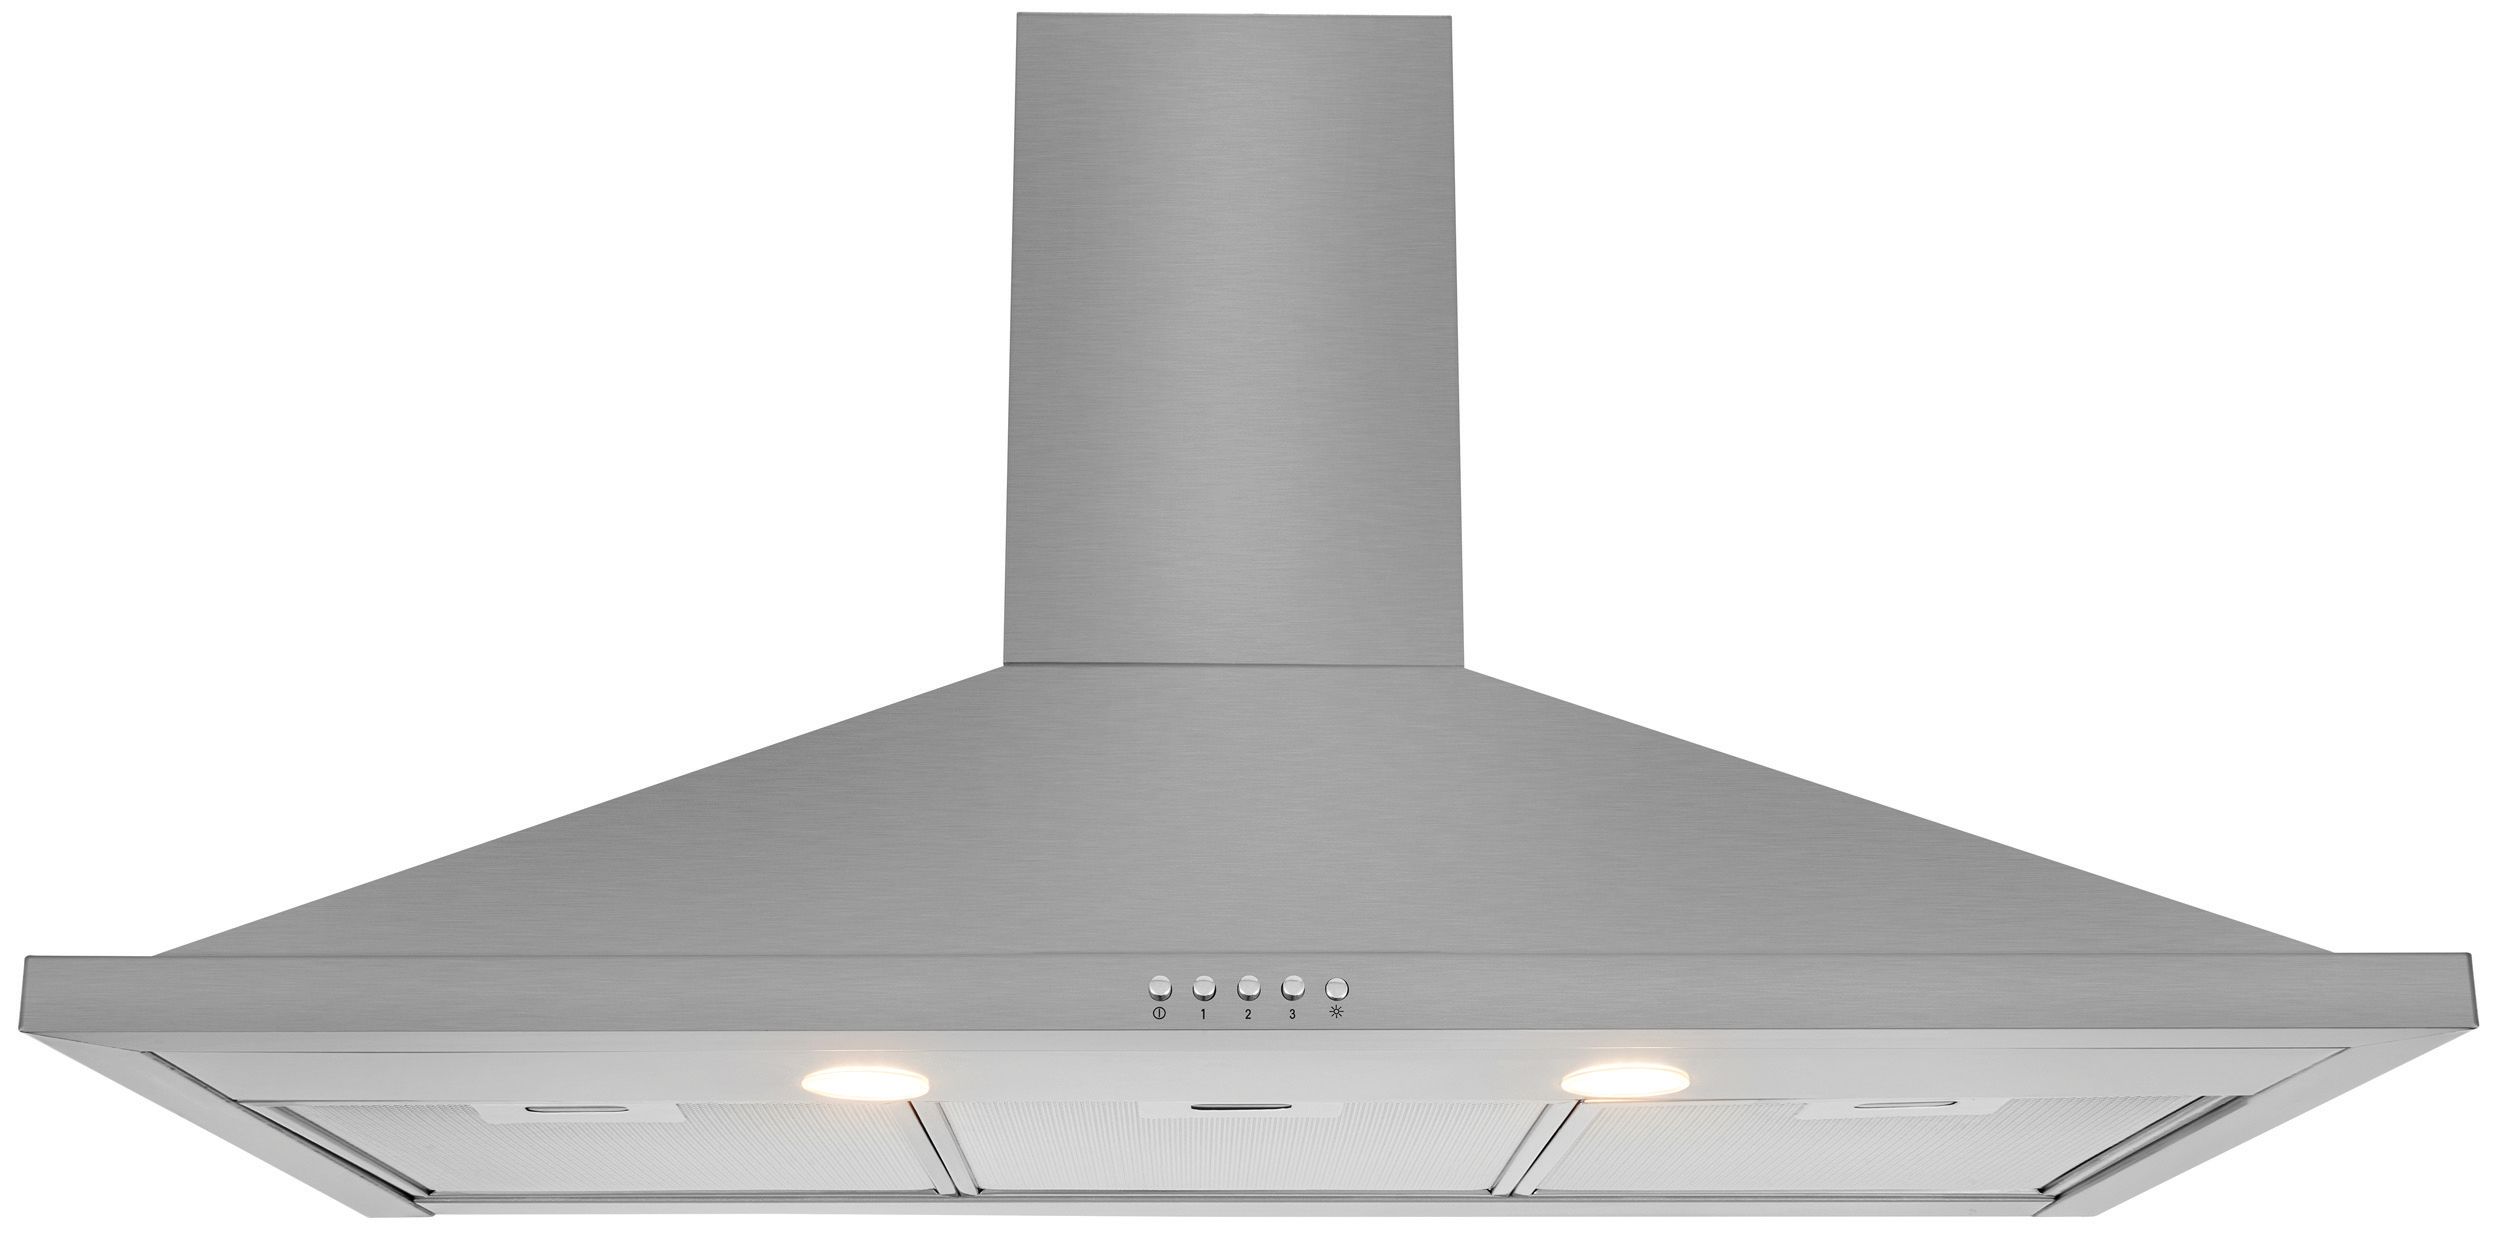 Leisure H92PX 90cm Chimney Cooker Hood - Stainless Steel